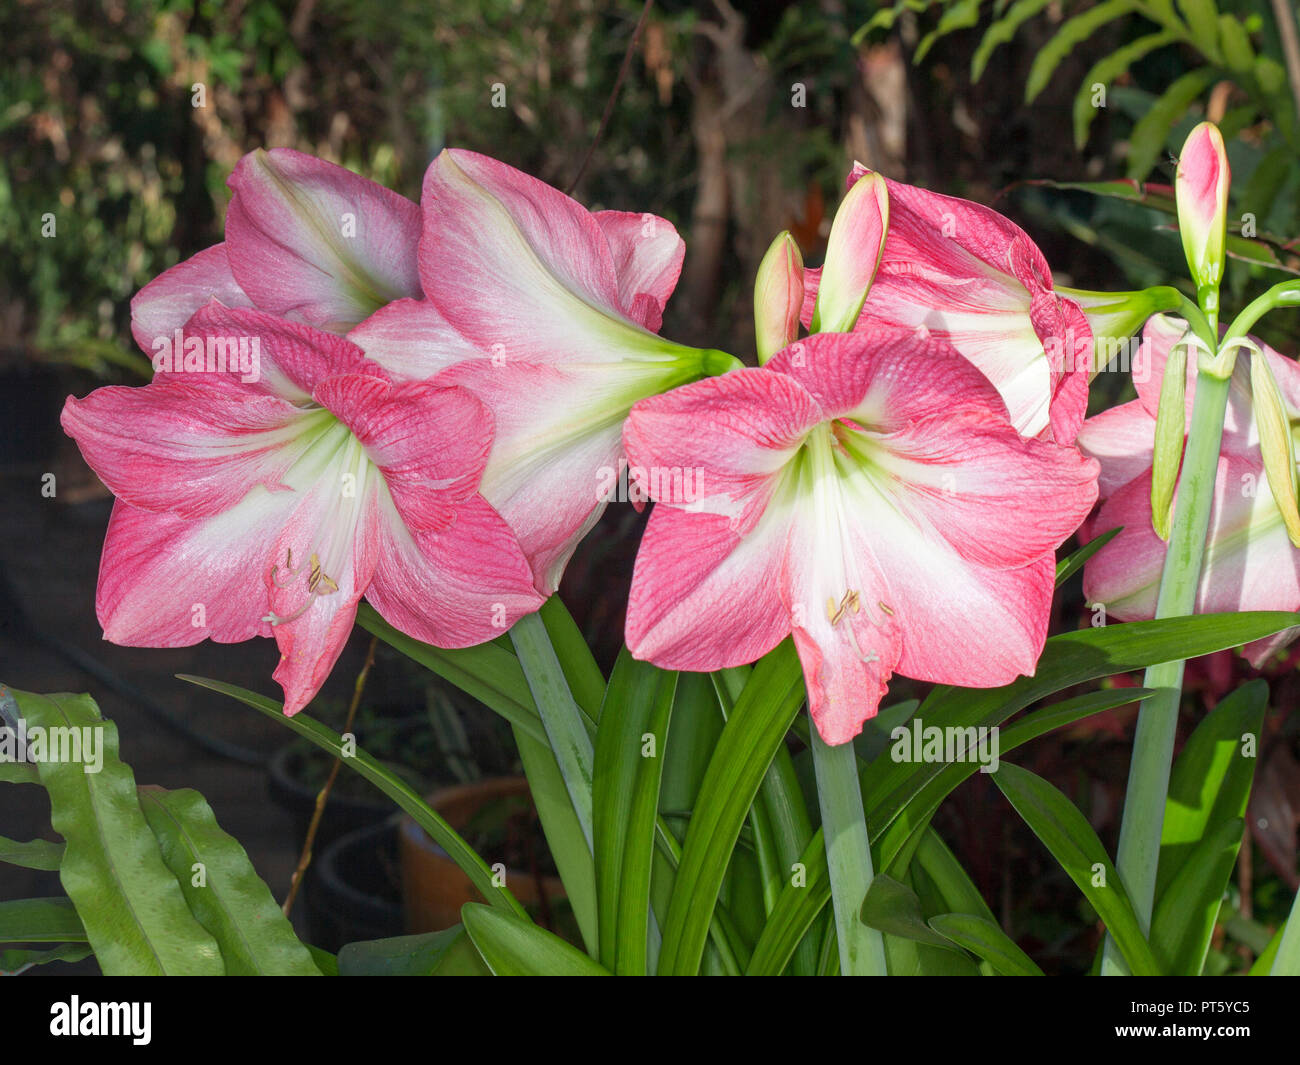 Cluster of large pink flowers with white centres of Hippeastrum 'Jenny', spring flowering bulb, against background of green foliage Stock Photo